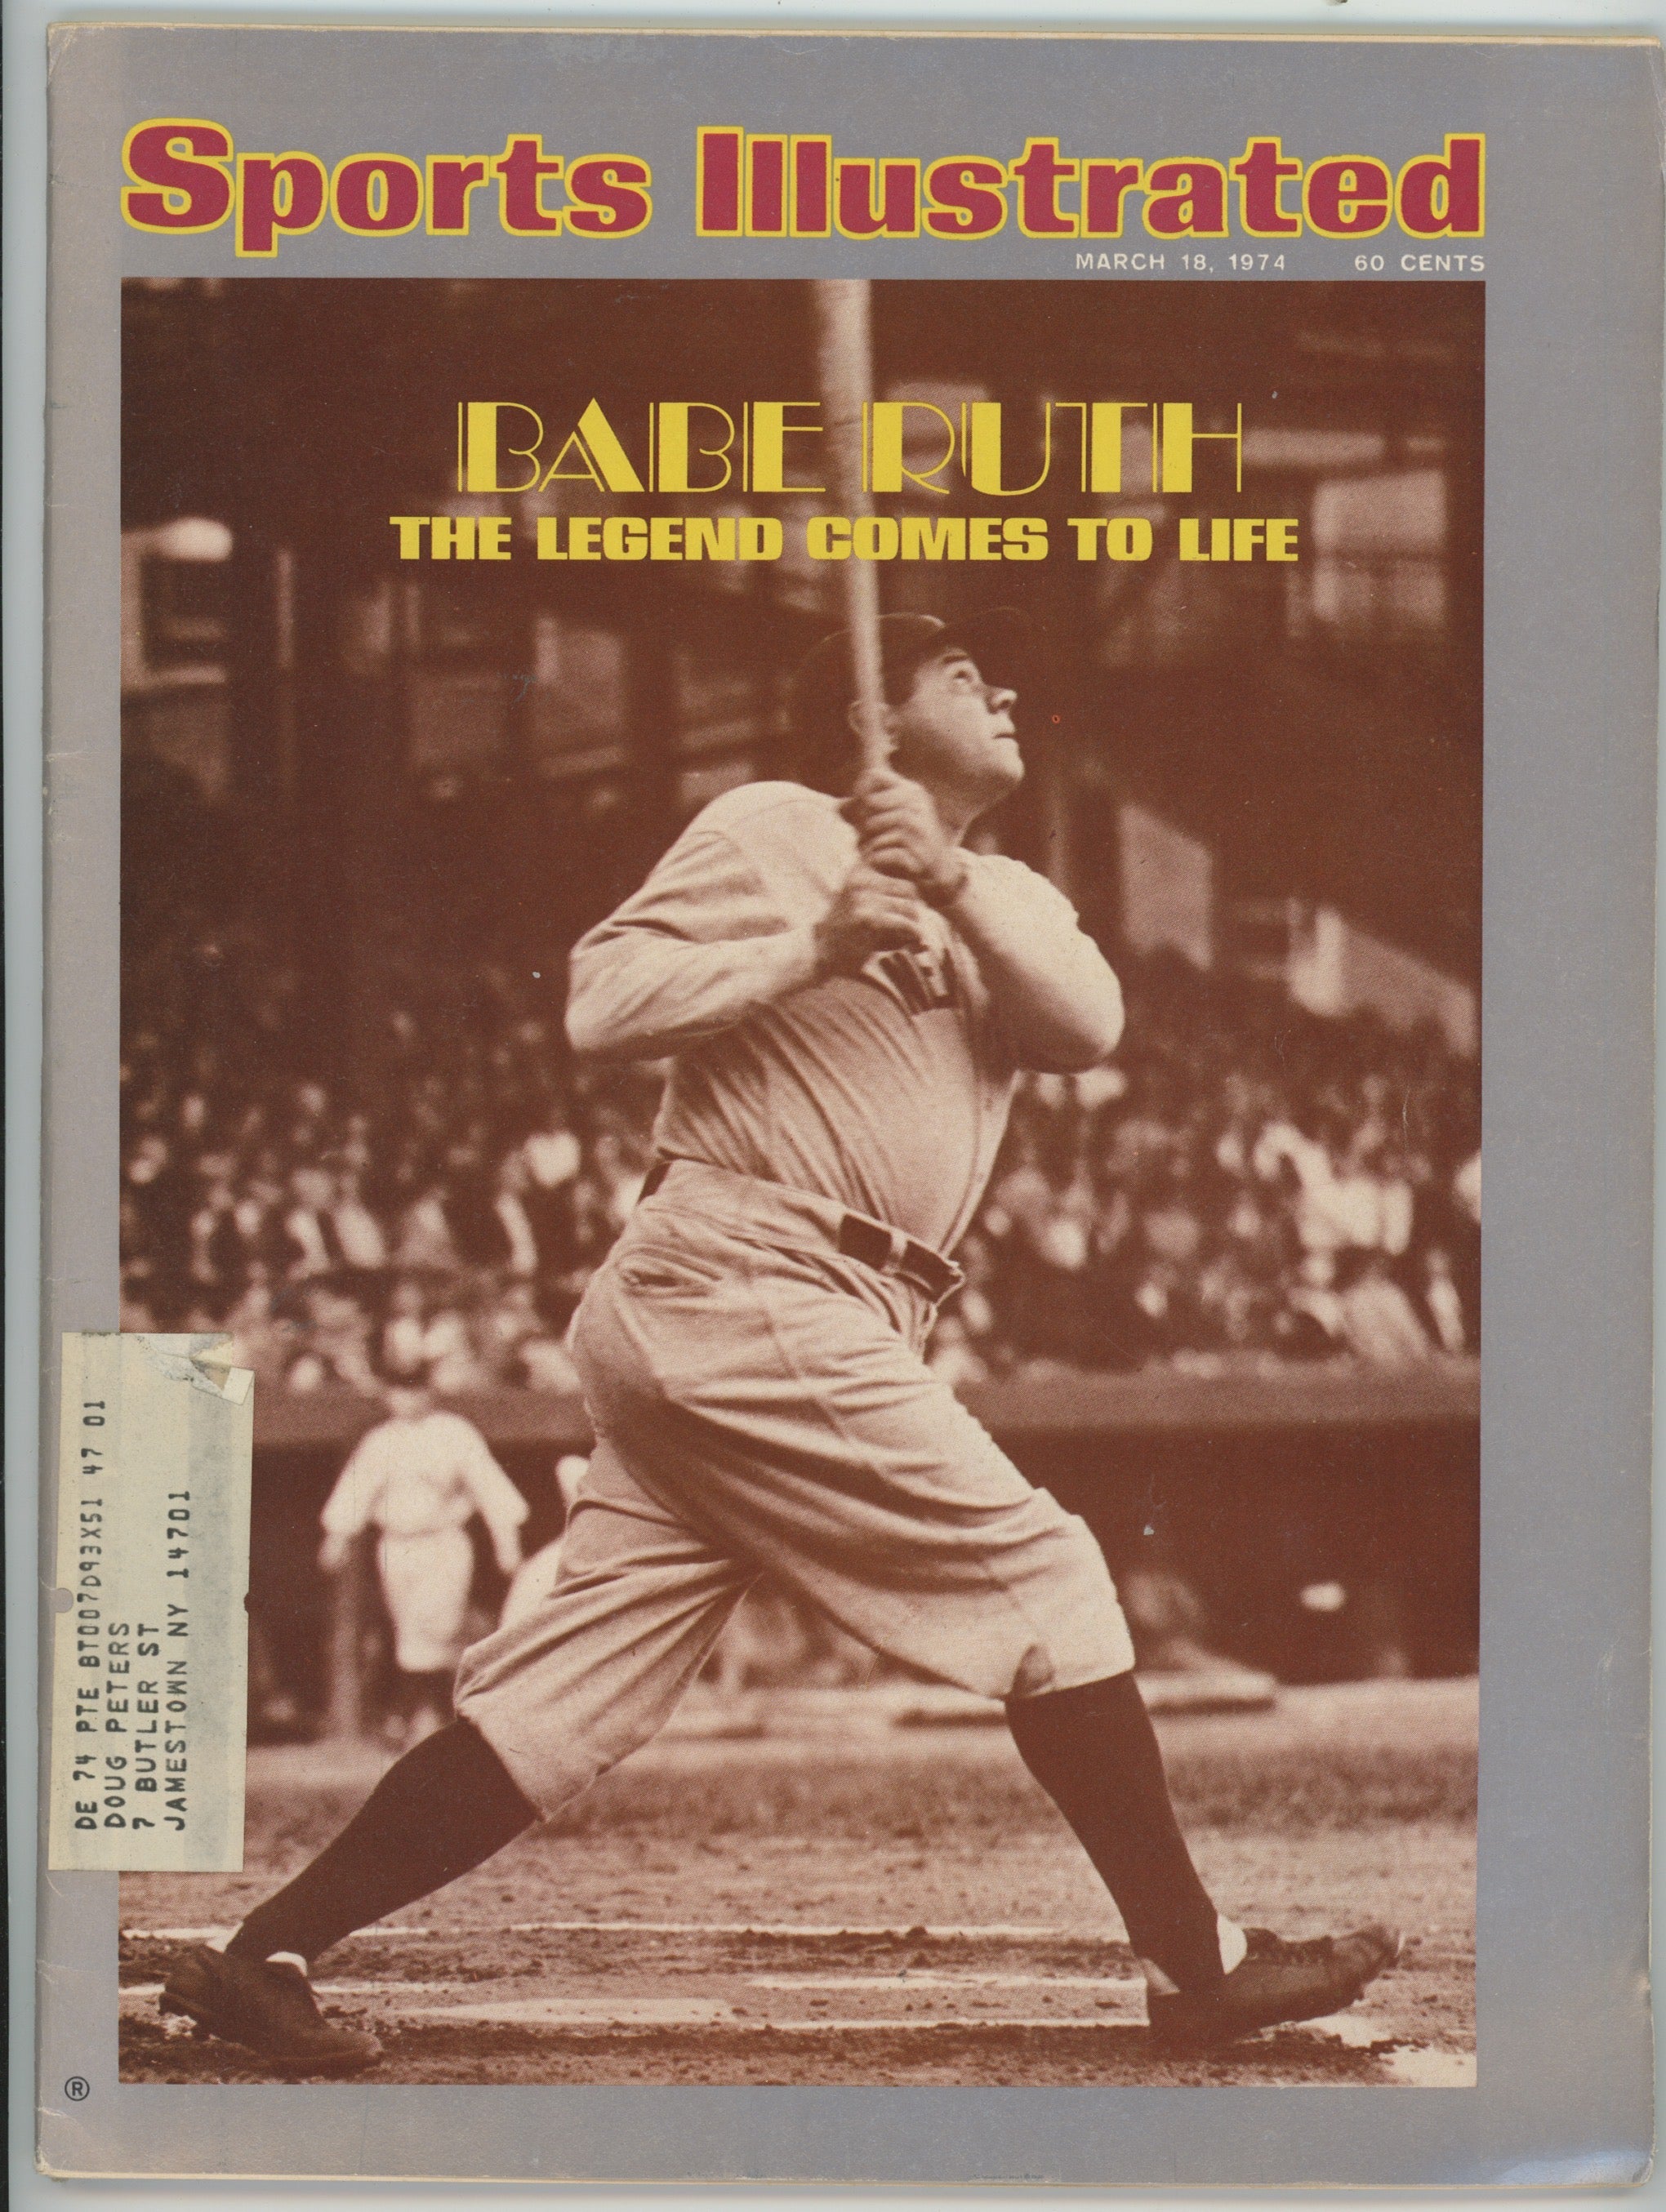 Babe Ruth "The Legend Comes to Life" 3/18/74 Sports Illustrated ML